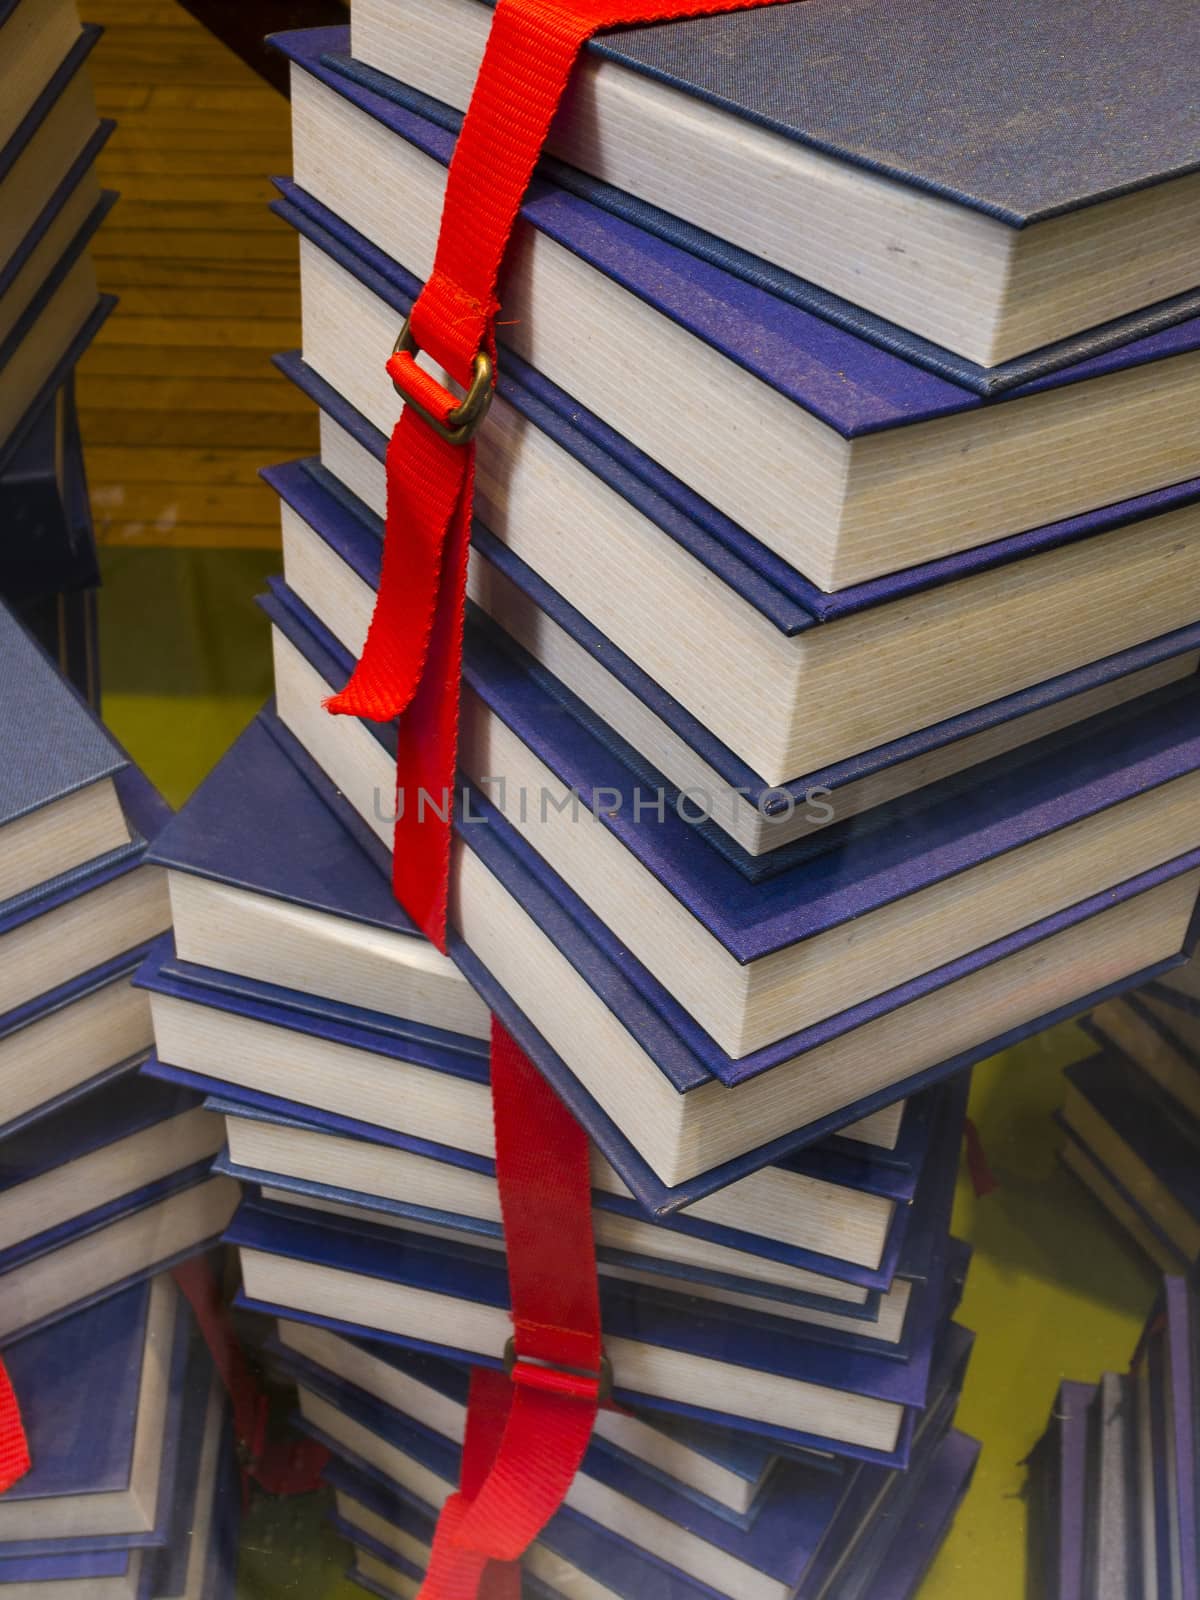 stack of books held together by a red strap